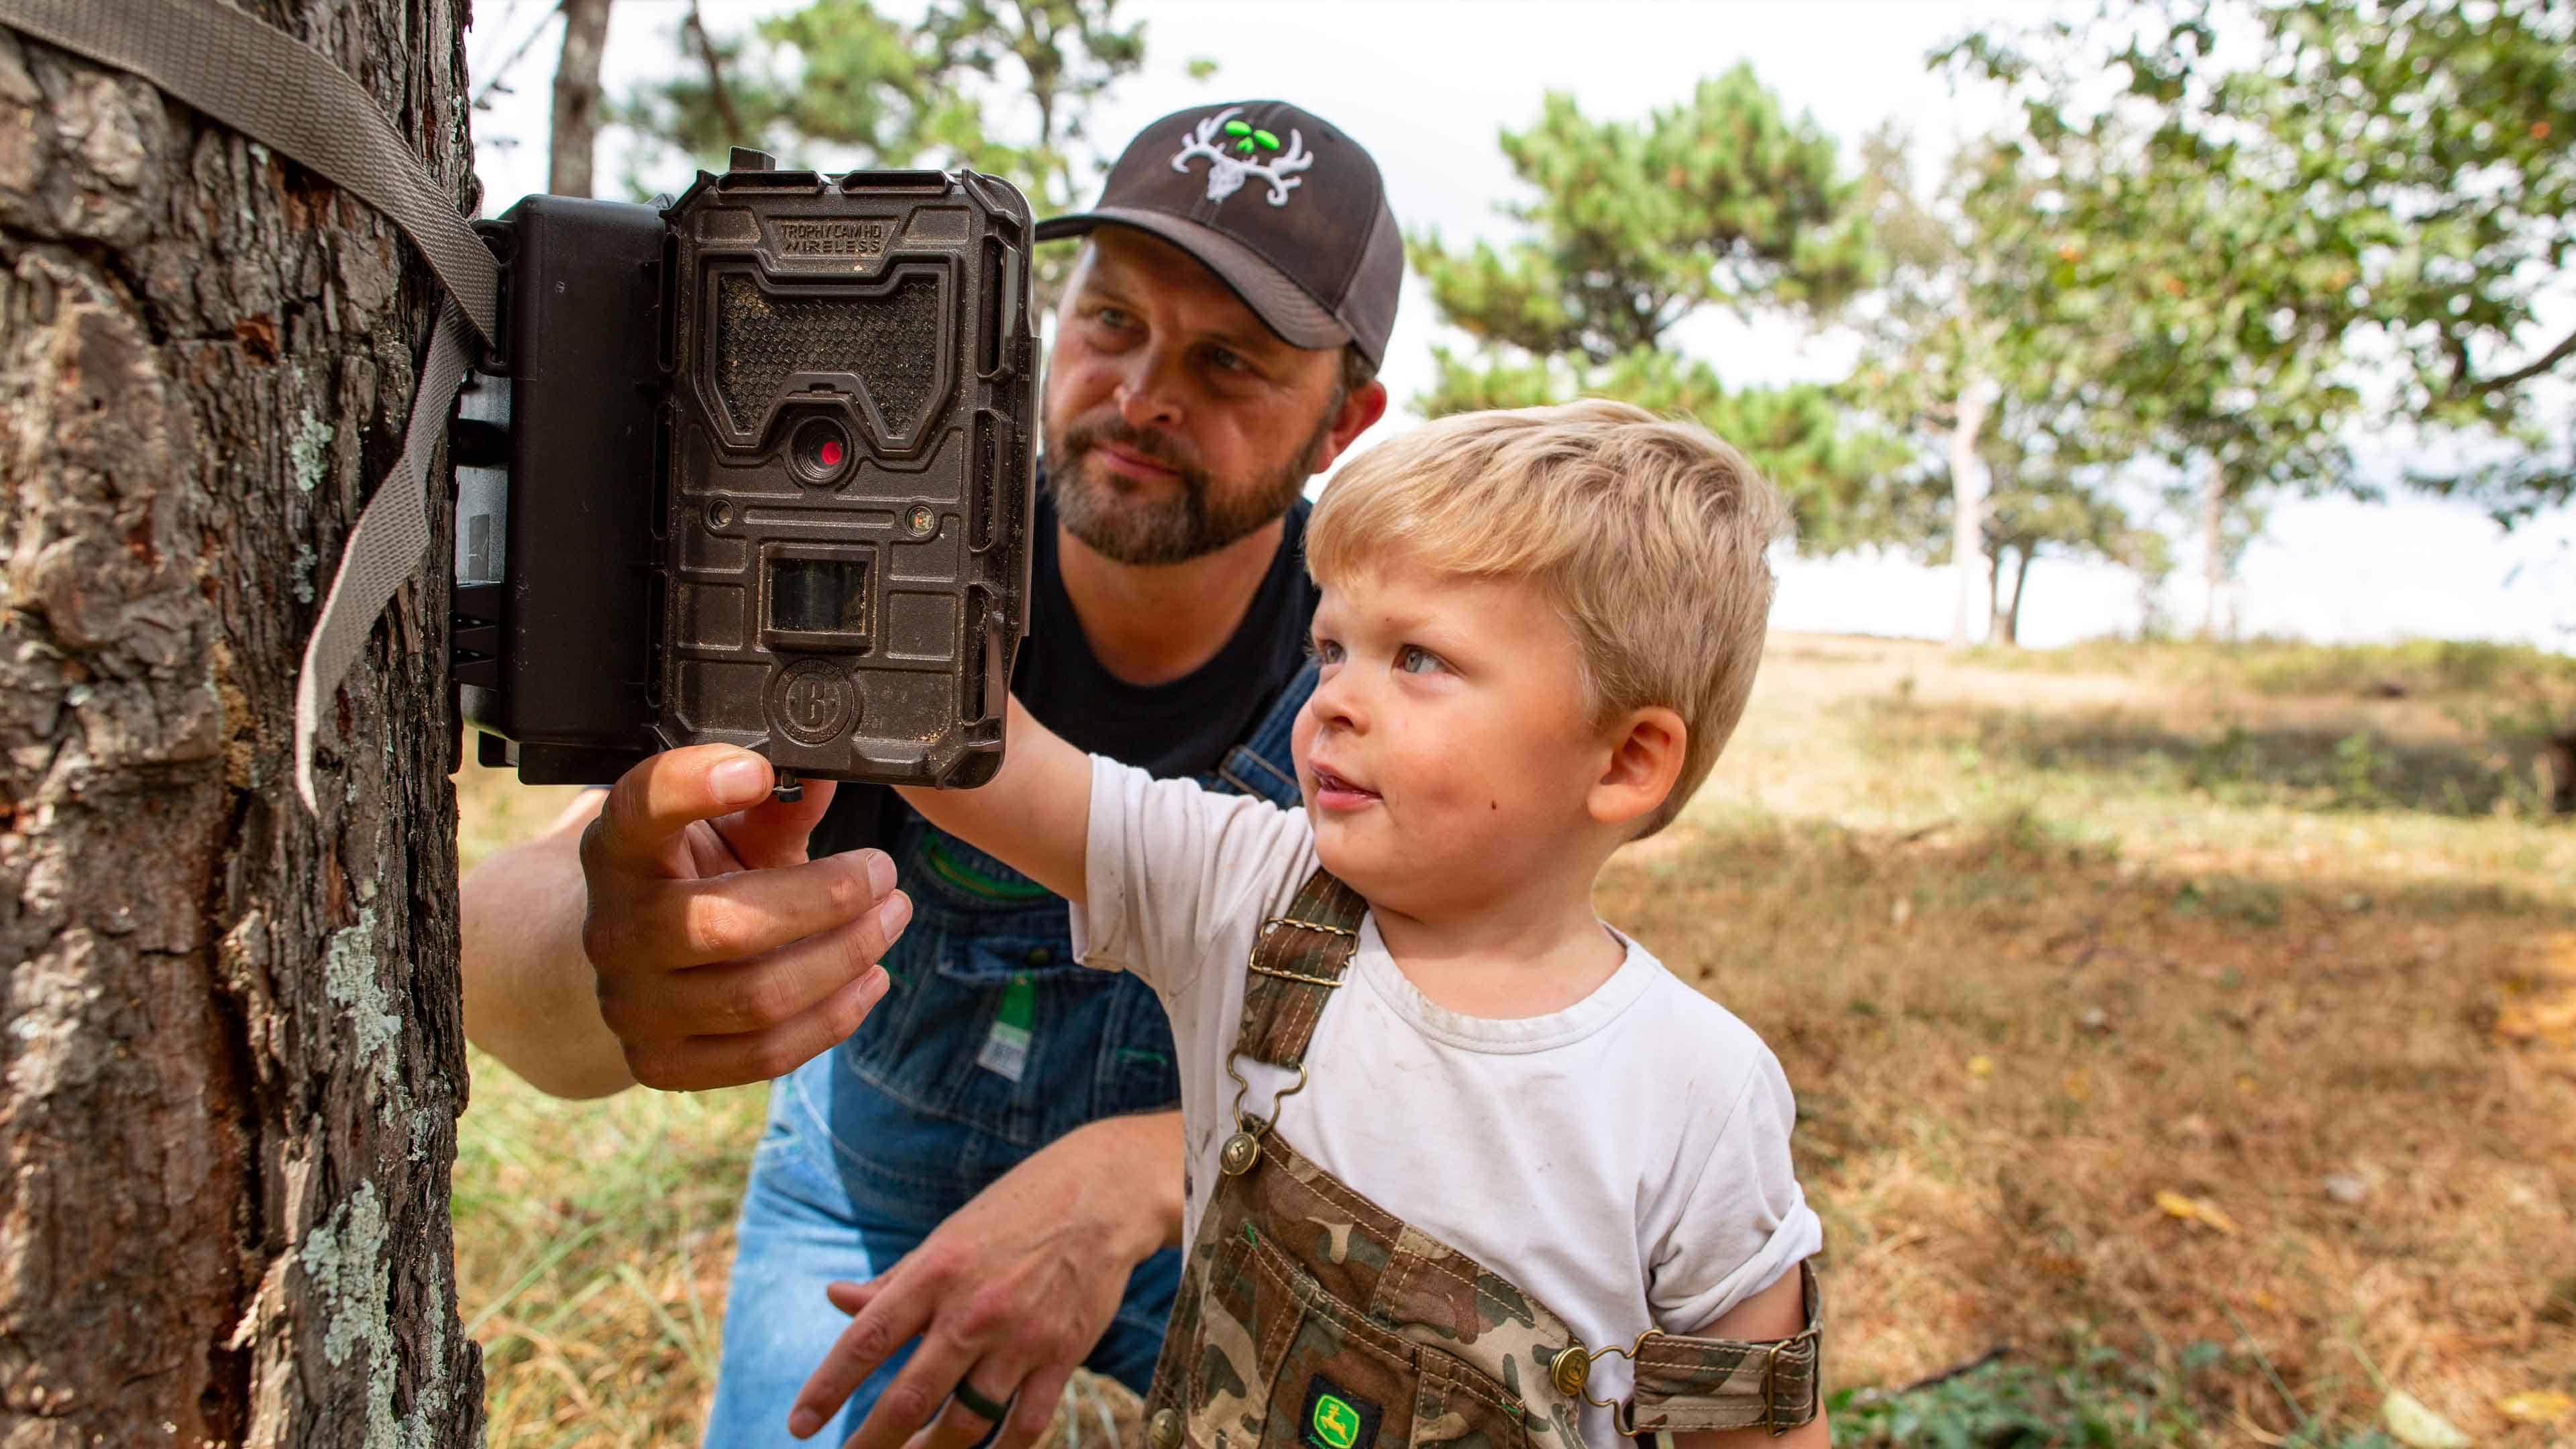 Deer Hunting Tip: Take inventory with trail cams